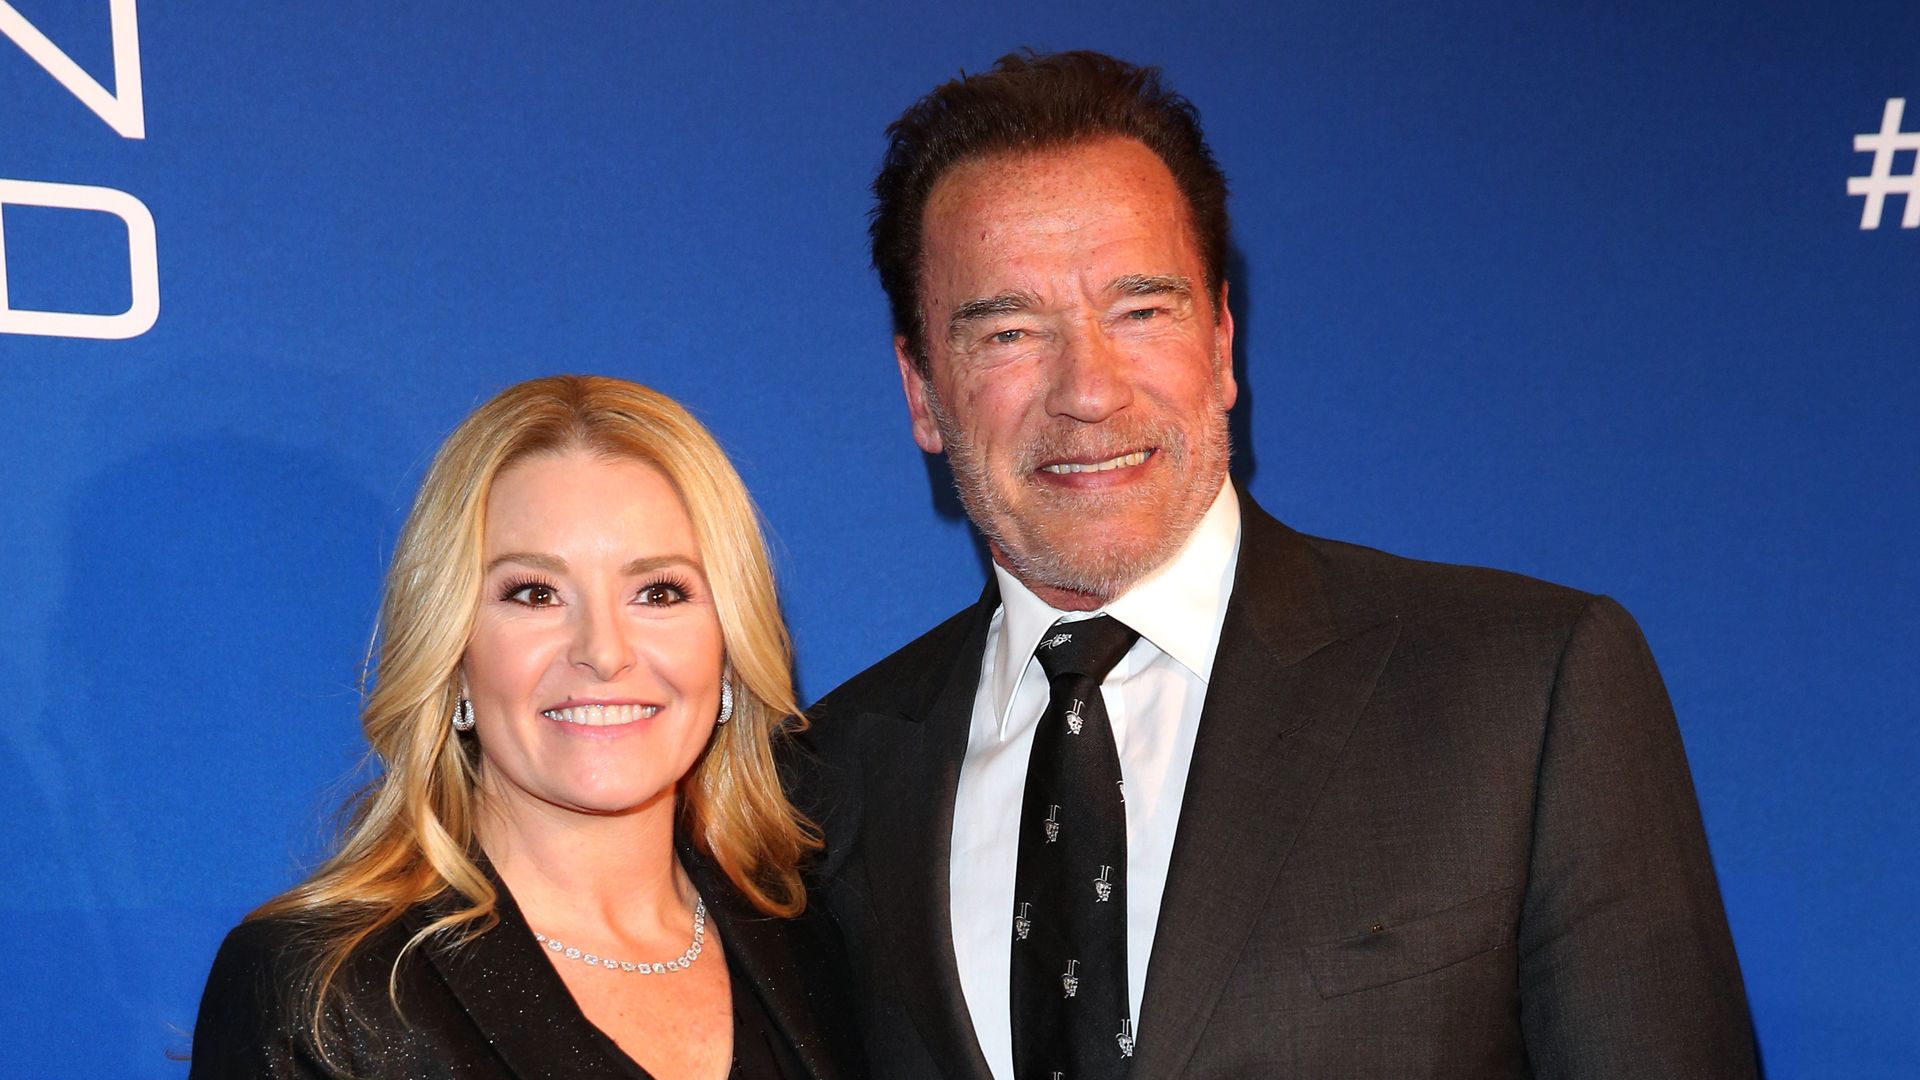 Arnold Schwarzenegger and his girlfriend Heather Milligan during the Schwarzenegger climate initiative charity dinner on January 23, 2020 in Kitzbuehel, Austria